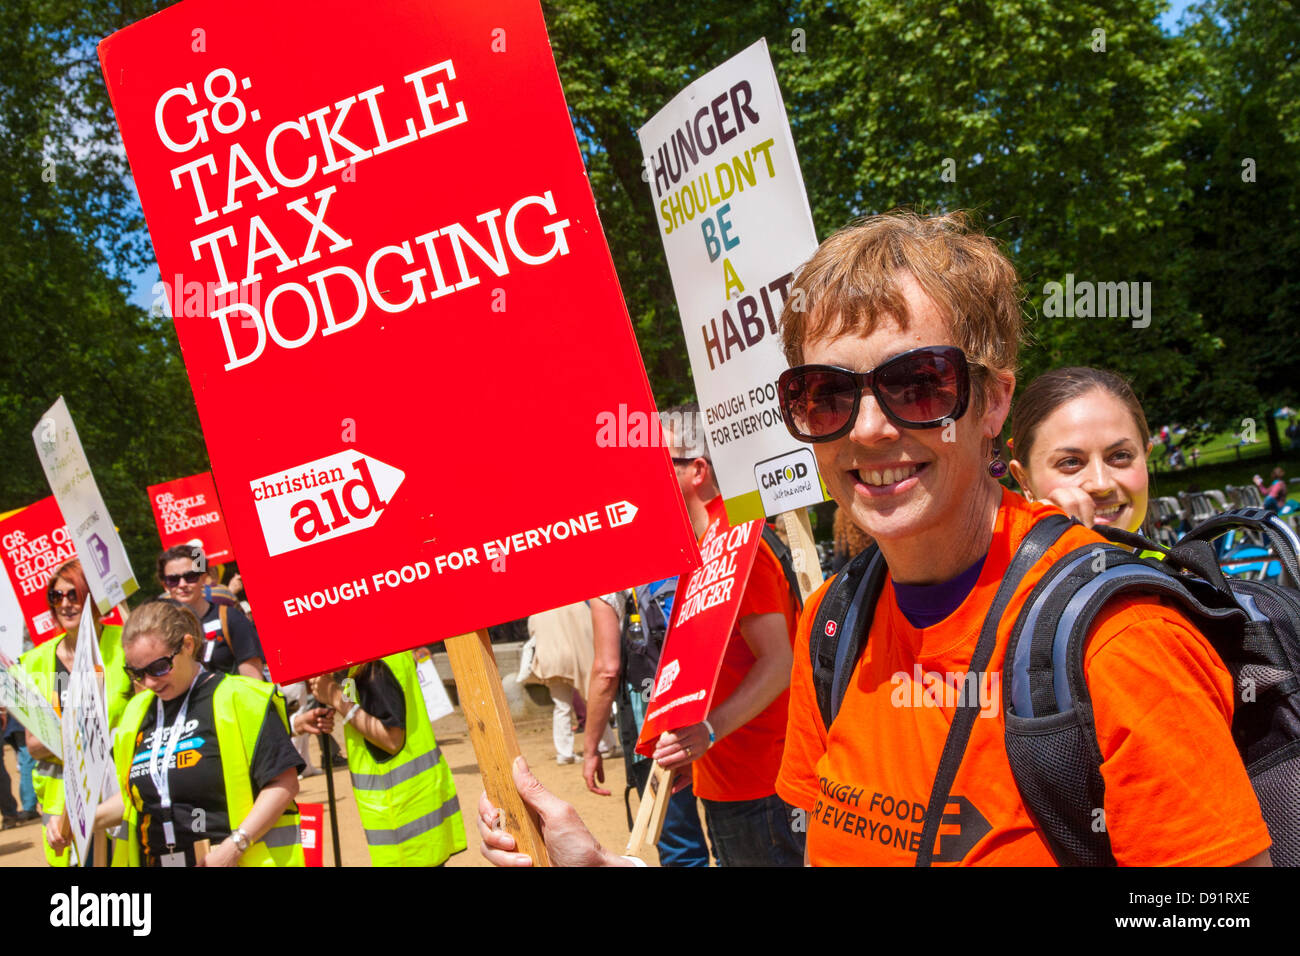 London, UK. 8th June, 2013. Thousands of people arrive at the Big IF event in London to demand the forthcoming G8 discusses food security for the world's poor people. Credit:  Paul Davey/Alamy Live News Stock Photo